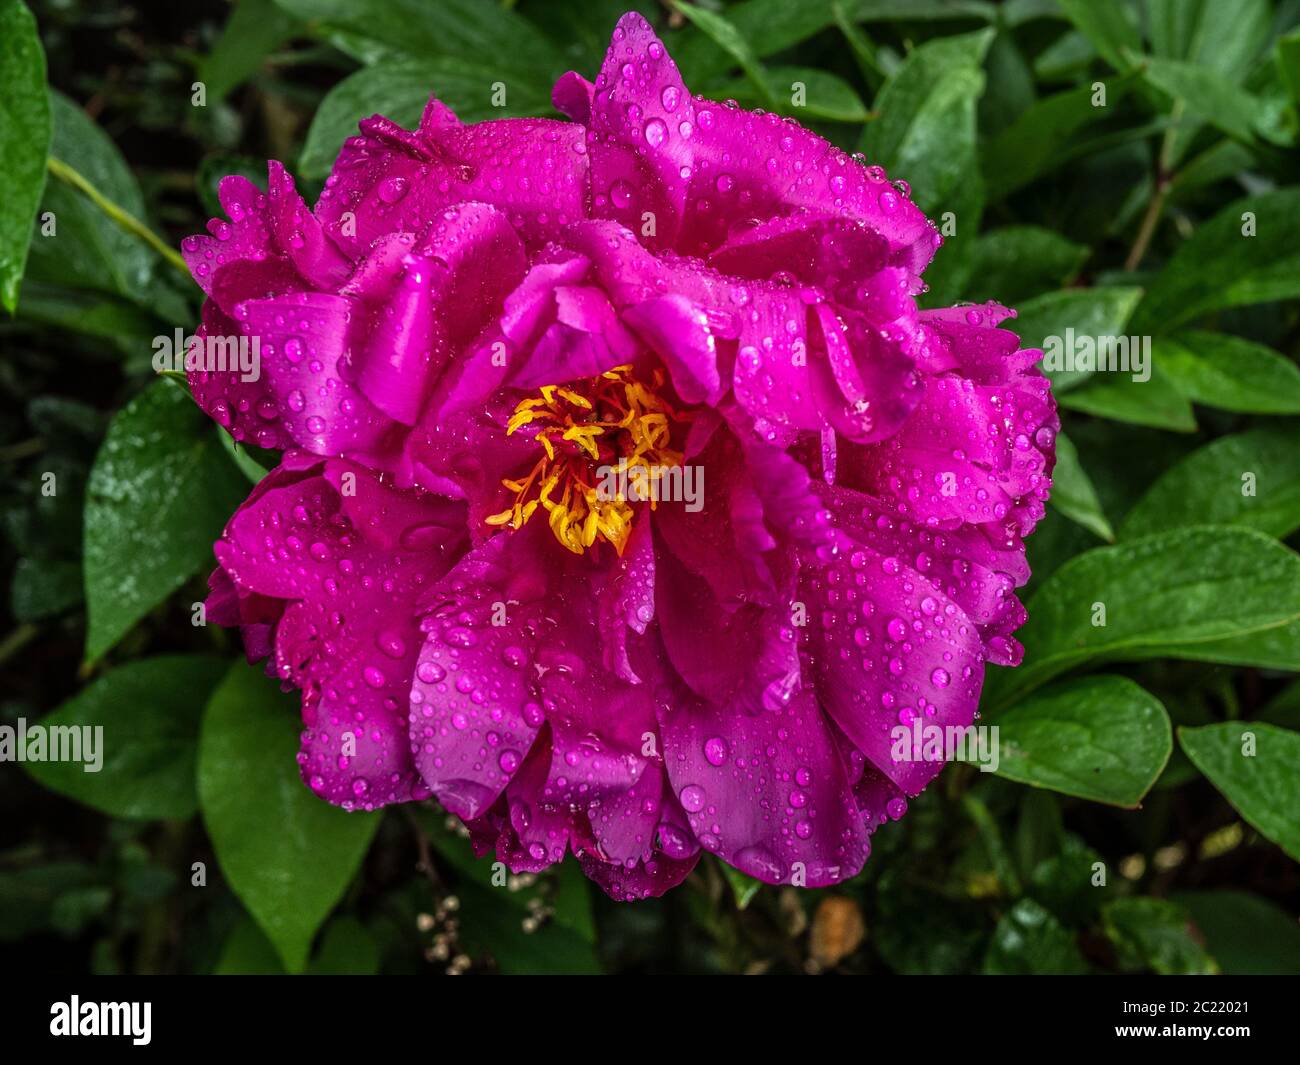 Closeup POV shot of a single, pink peony flower, with green surrounding foliage, after rain had soaked the beautiful petals. Stock Photo